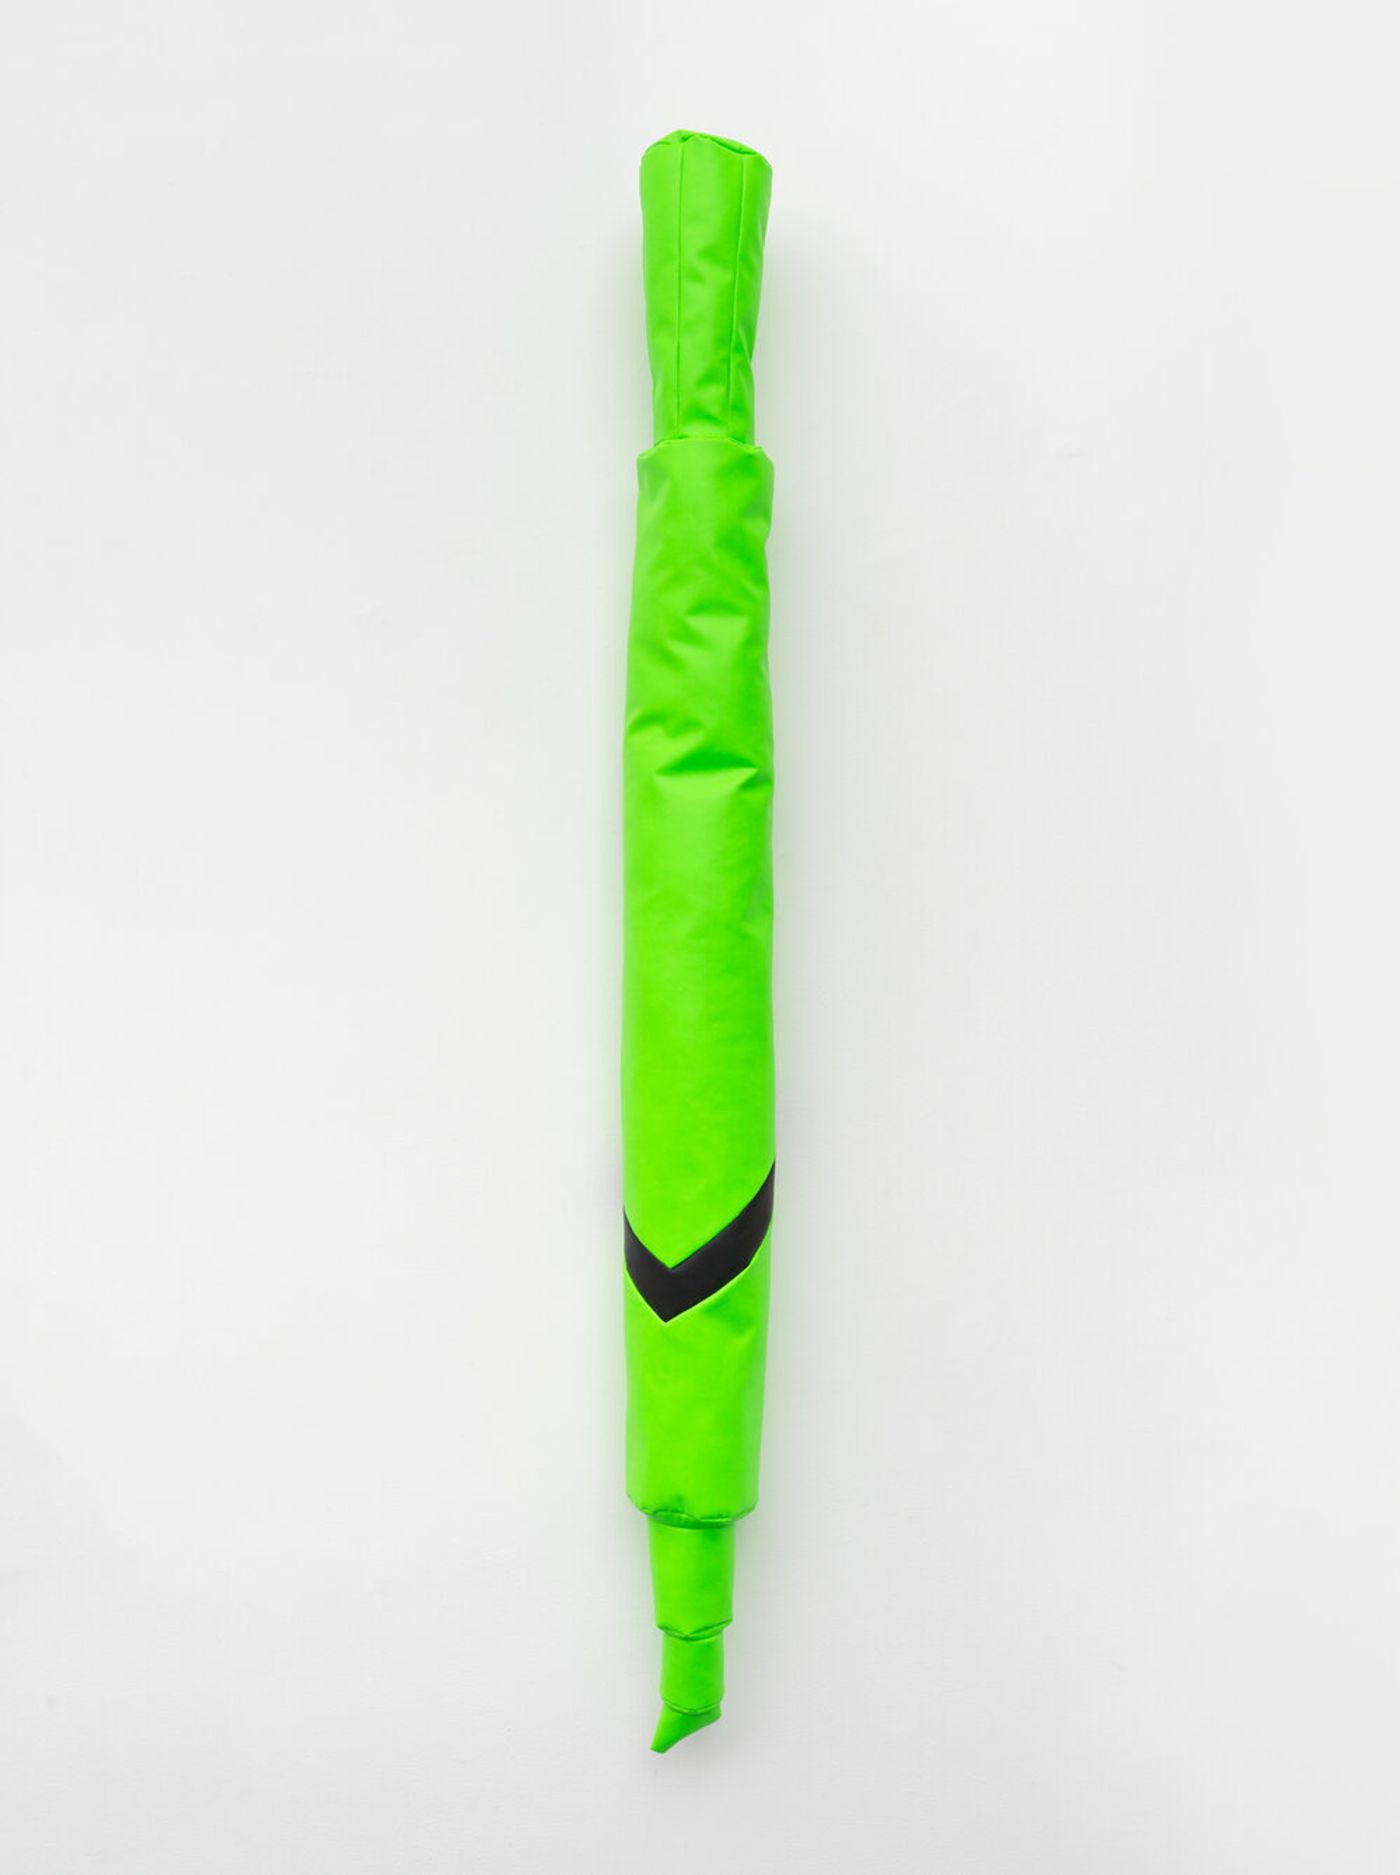 Image of Soft Green Highlighter, 2019: Vinyl and polyfill